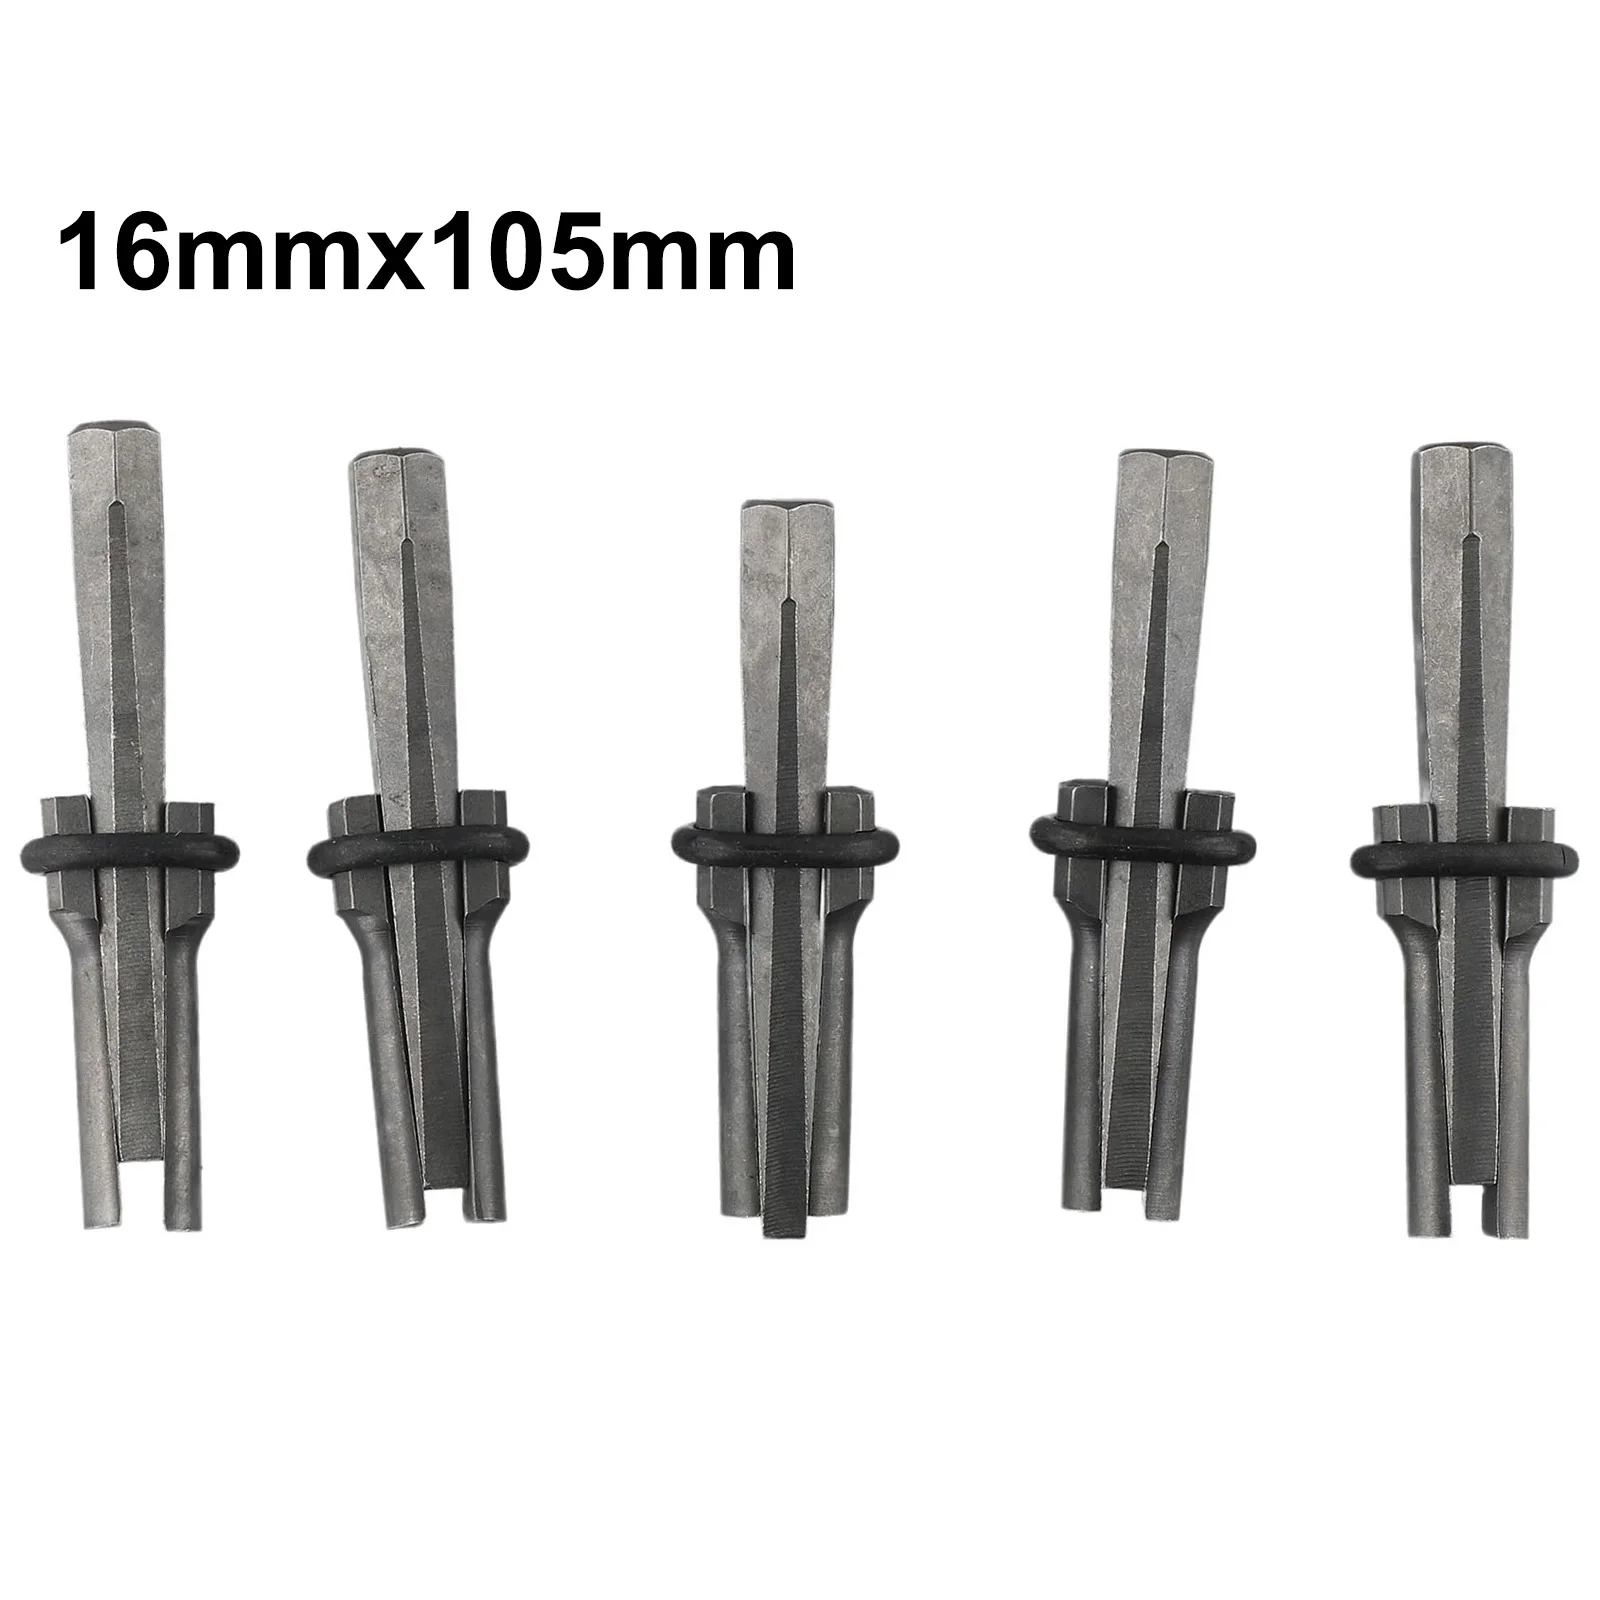 5 Set 5/8 Inch Stone Splitting Tool Stone Splitter Metal Plug Wedges And Feathers Shims Concrete Rock Splitters Hand Tool 105mm 3 4 plug metal wedges feather shims concrete rock stone splitter hand tool 20mm